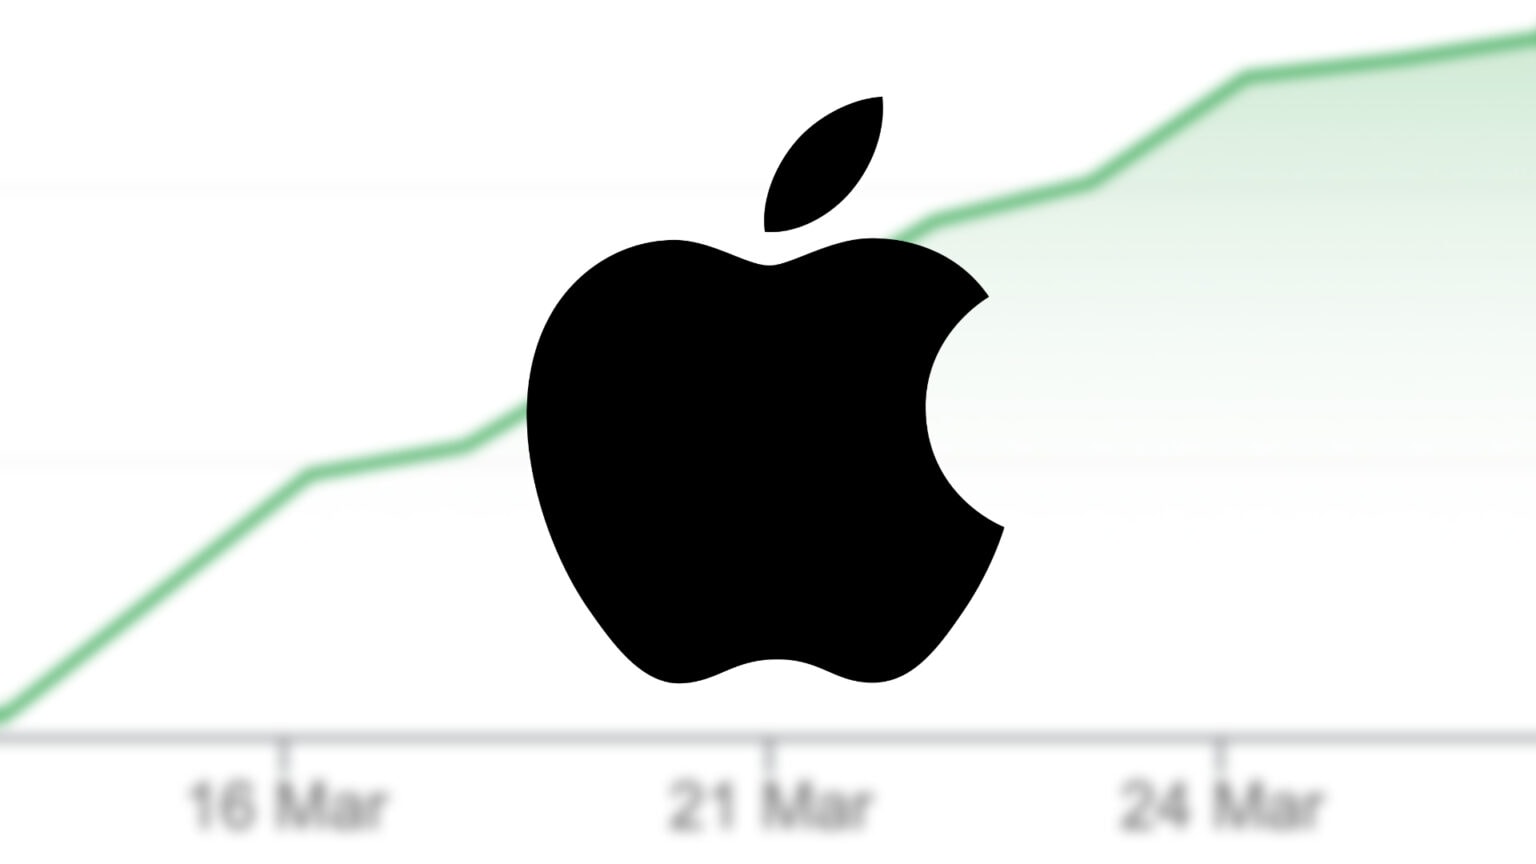 Apple stock sees 10th consecutive rise